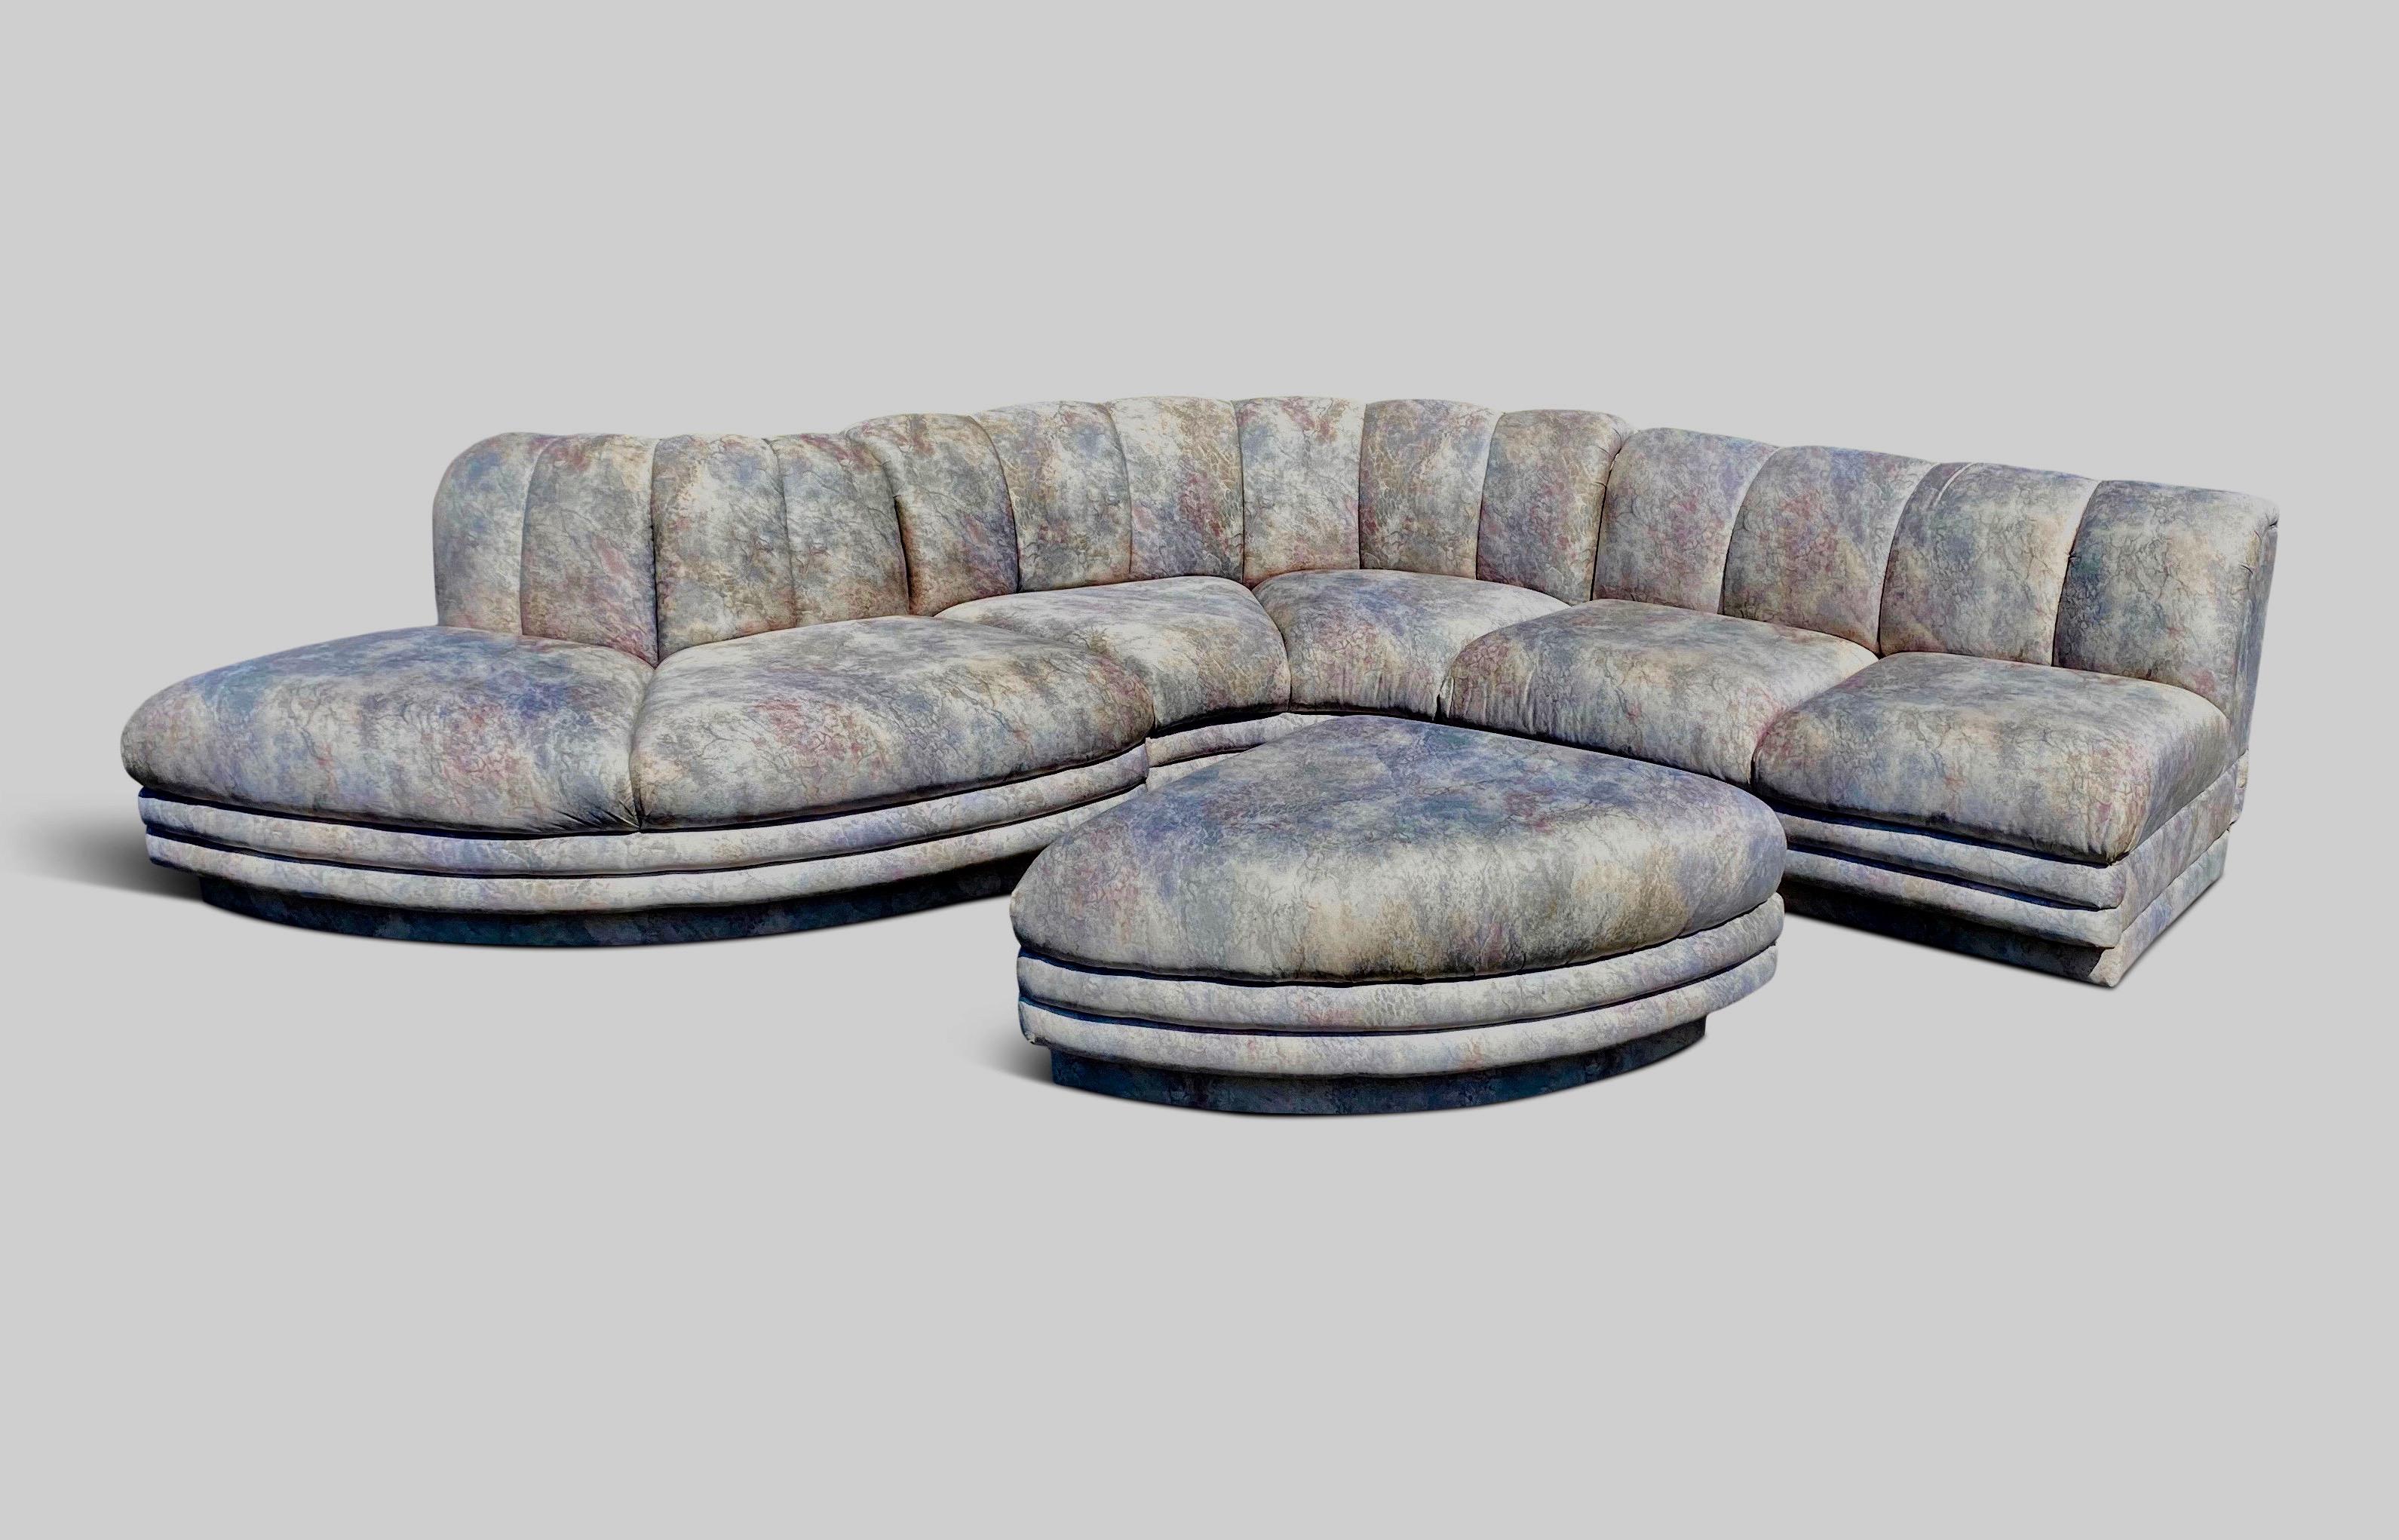 1970s large Baughman style serpentine sofa with a plinth base and a channel back. This sofa has a built in ottoman in a 1970s fabric. The sofa is in wonderful structural condition, the fabric could use an update. 

We would be pleased to reupholster